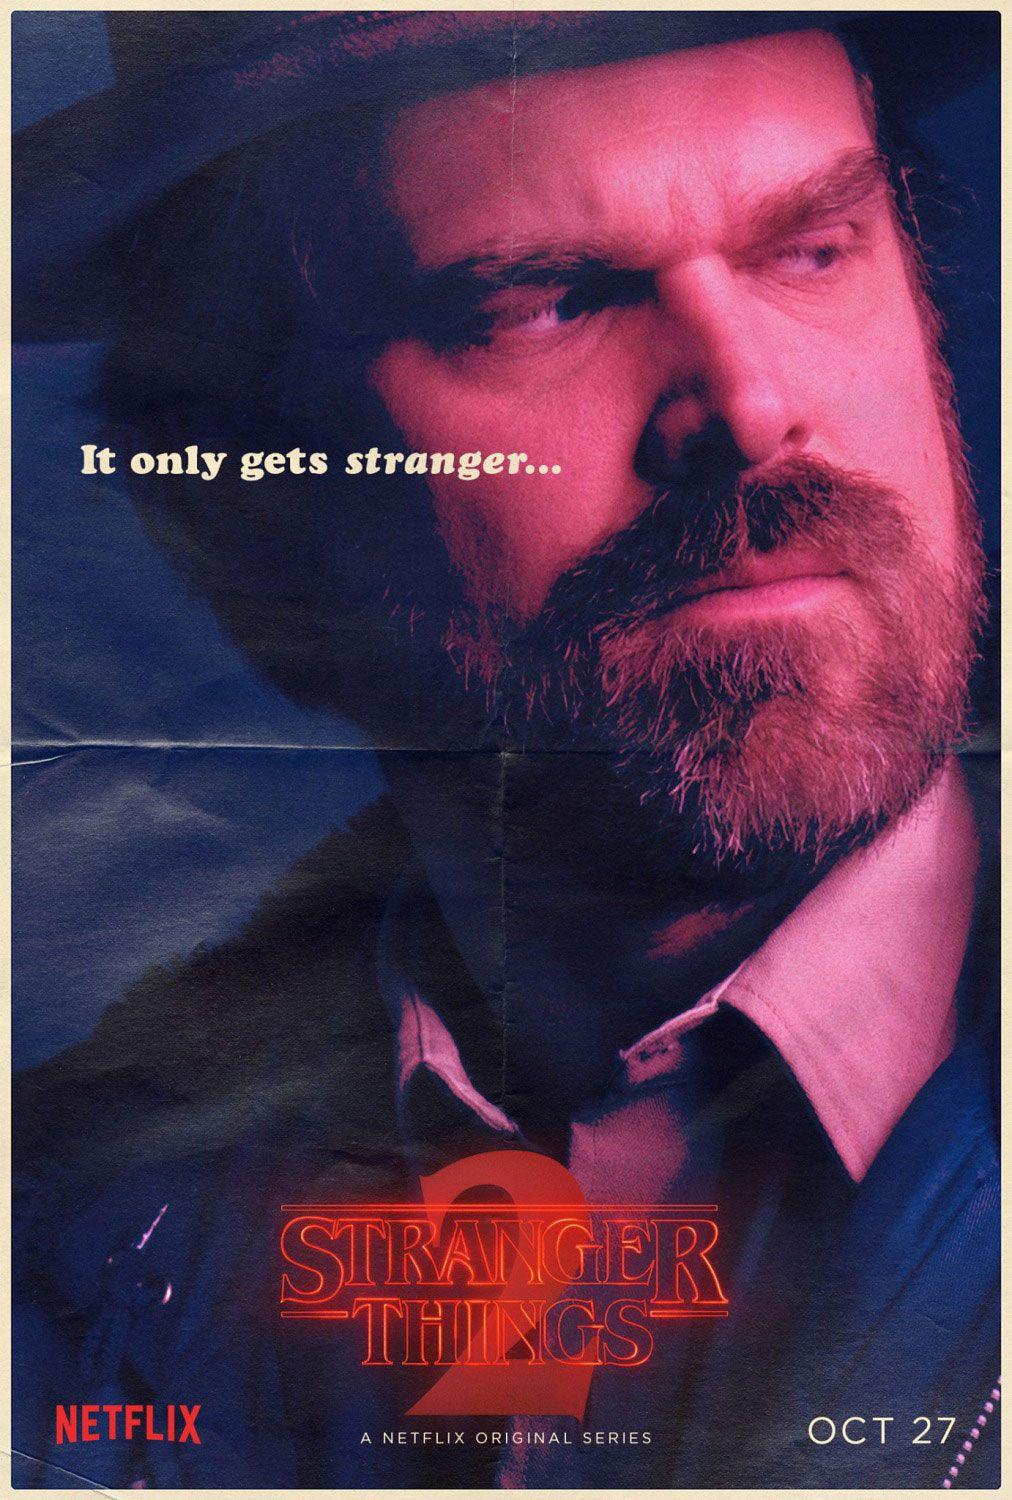 StrangerThings Character poster of Chief Jim